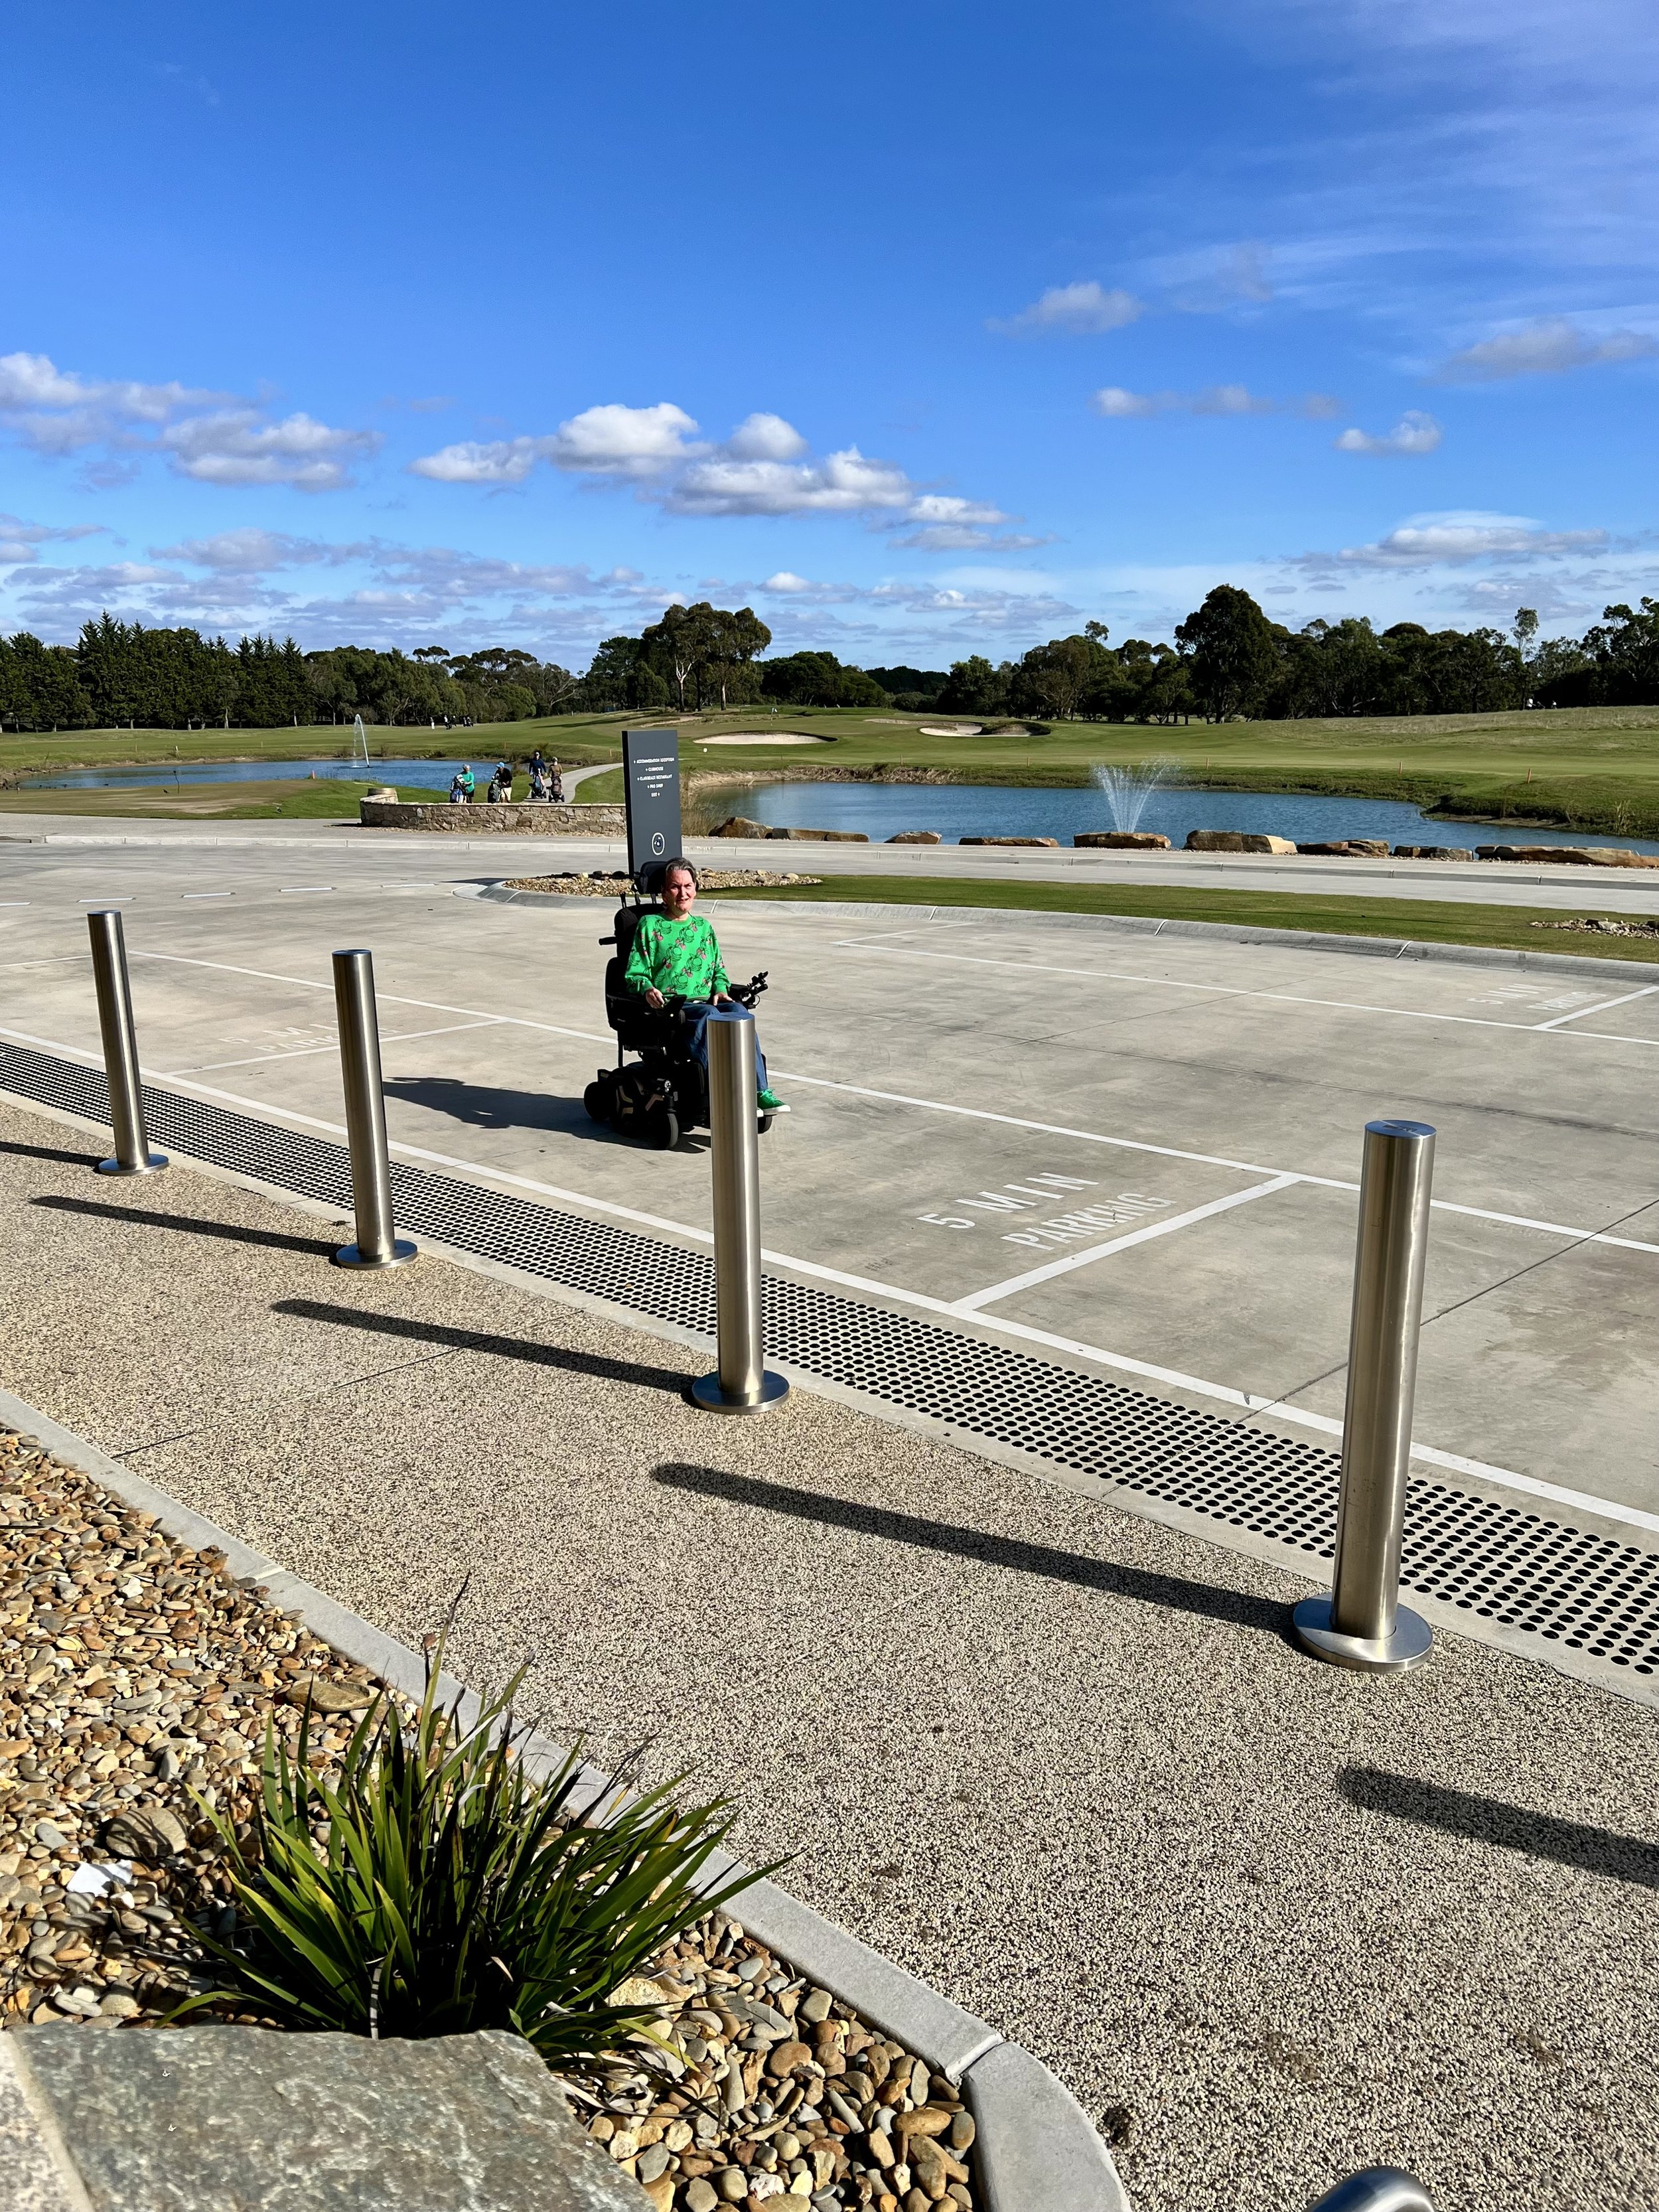  Blue sunny sky with white clouds dark green Bush like treeswith golf course Green ground with a small blue lake  in the background . Woman in a bright green top sitting in a wheelchair on the wide pale concrete drive there are silver bollards in fro